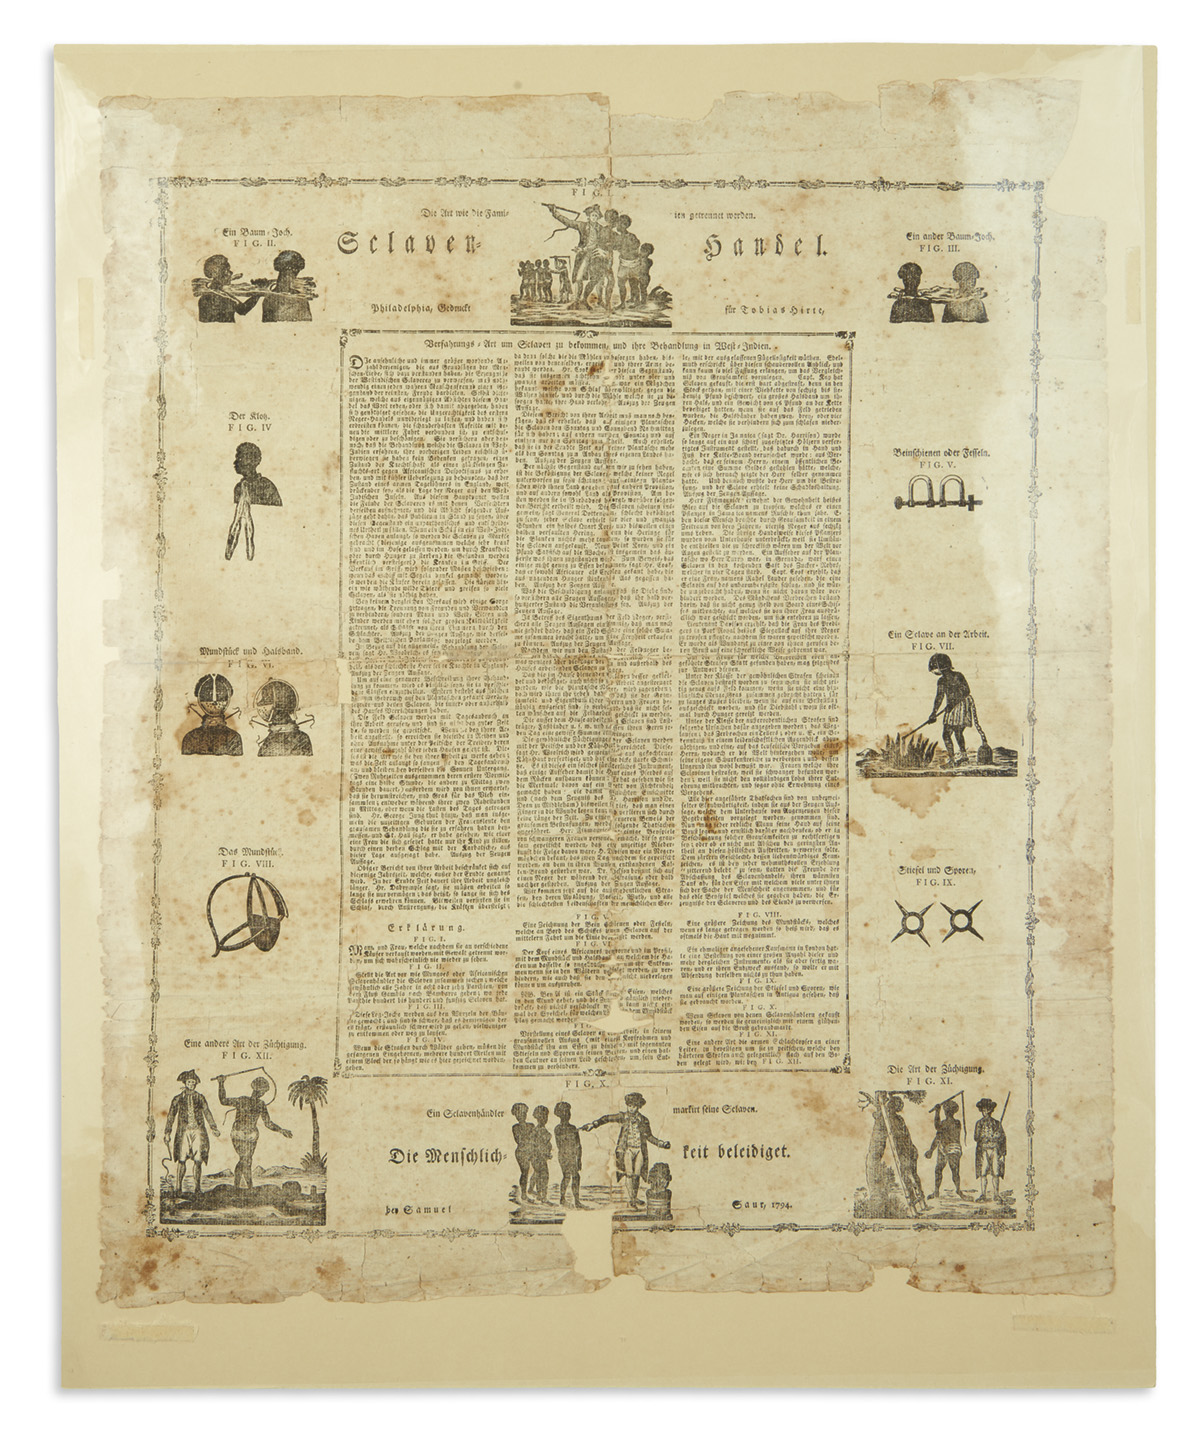 (SLAVERY AND ABOLITION.) A rare early illustrated German-American anti-slavery broadside titled Sclaven-Handel.